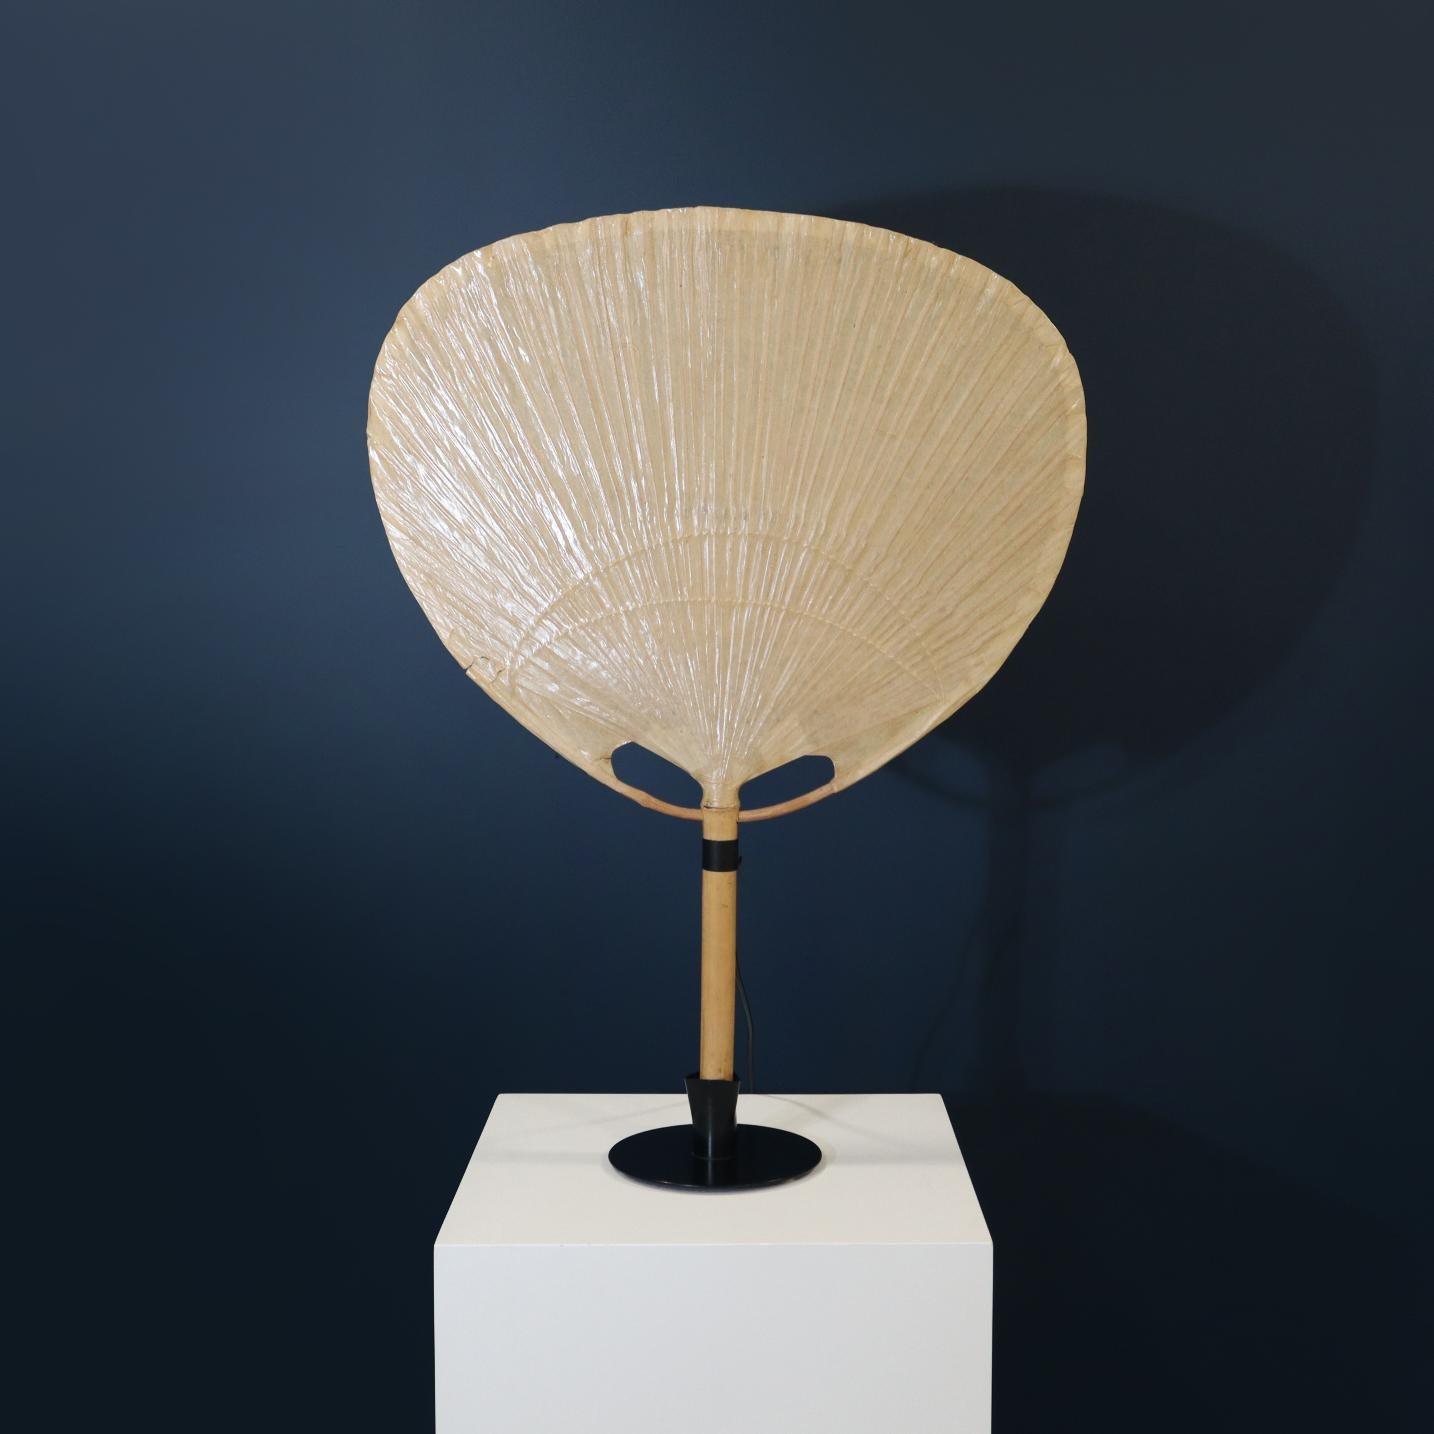 Uchiwa III Wall & Table Lamp by Ingo Maurer, 1970s

This stunning Uchiwa lamp was designed by Ingo Maurer, in Germany, 1973. It is the larger size from the table lamp series with its rare and original metal holder, the Uchiwa can also be used as a